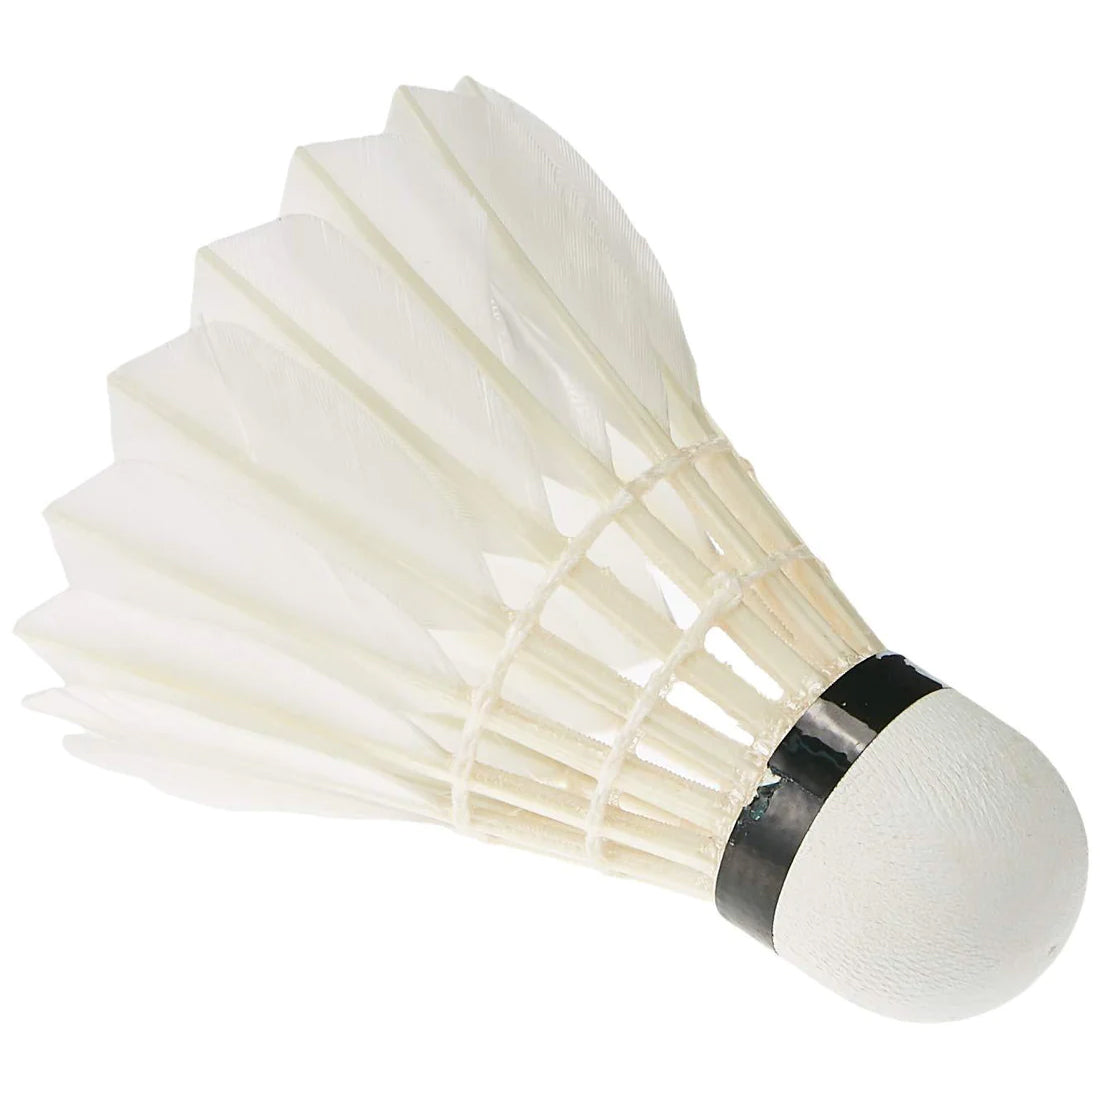 Li-Ning SG Gold Competition Shuttlecock Feather 77 (White) - Best Price online Prokicksports.com